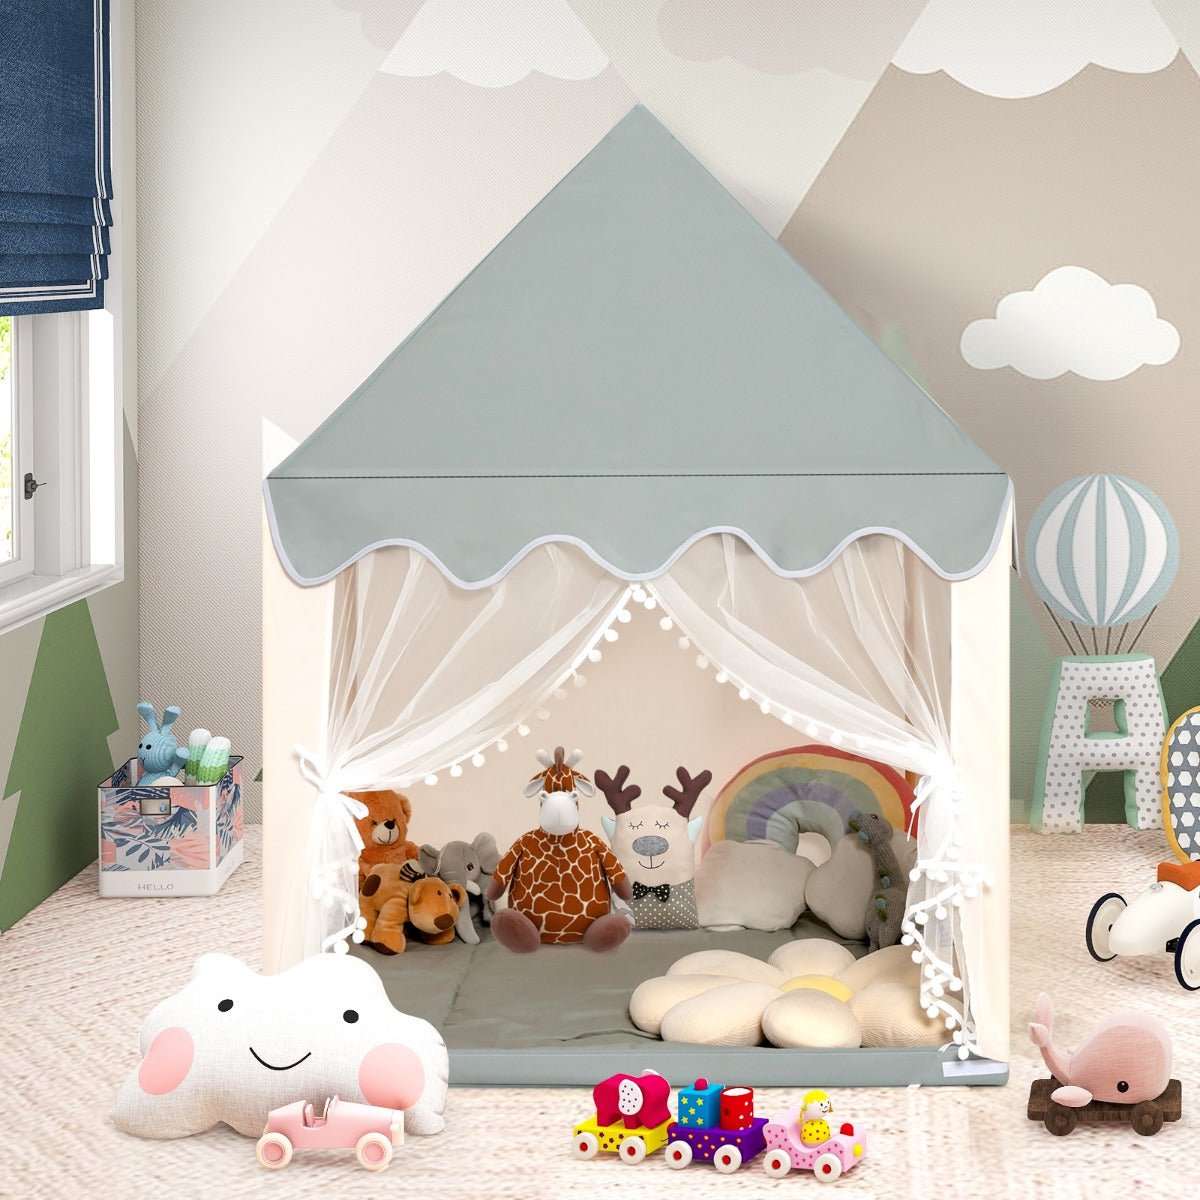 Buy the Perfect Playhouse with Washable Soft Mat in Australia